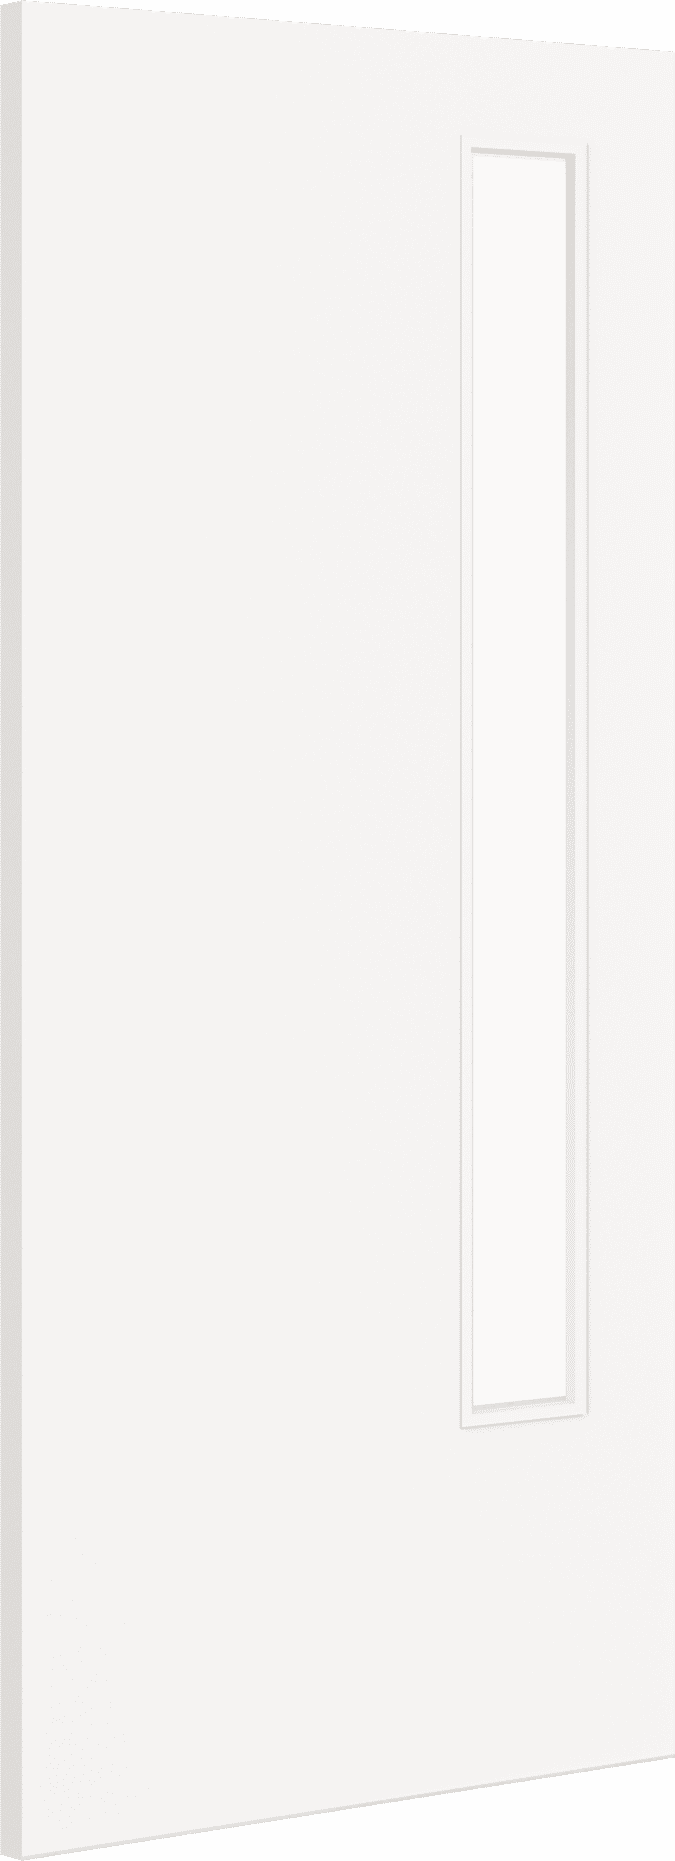 1981mm x 914mm x 44mm (36") Architectural Paint Grade White 13 Frosted Glazed Fire Door Blank